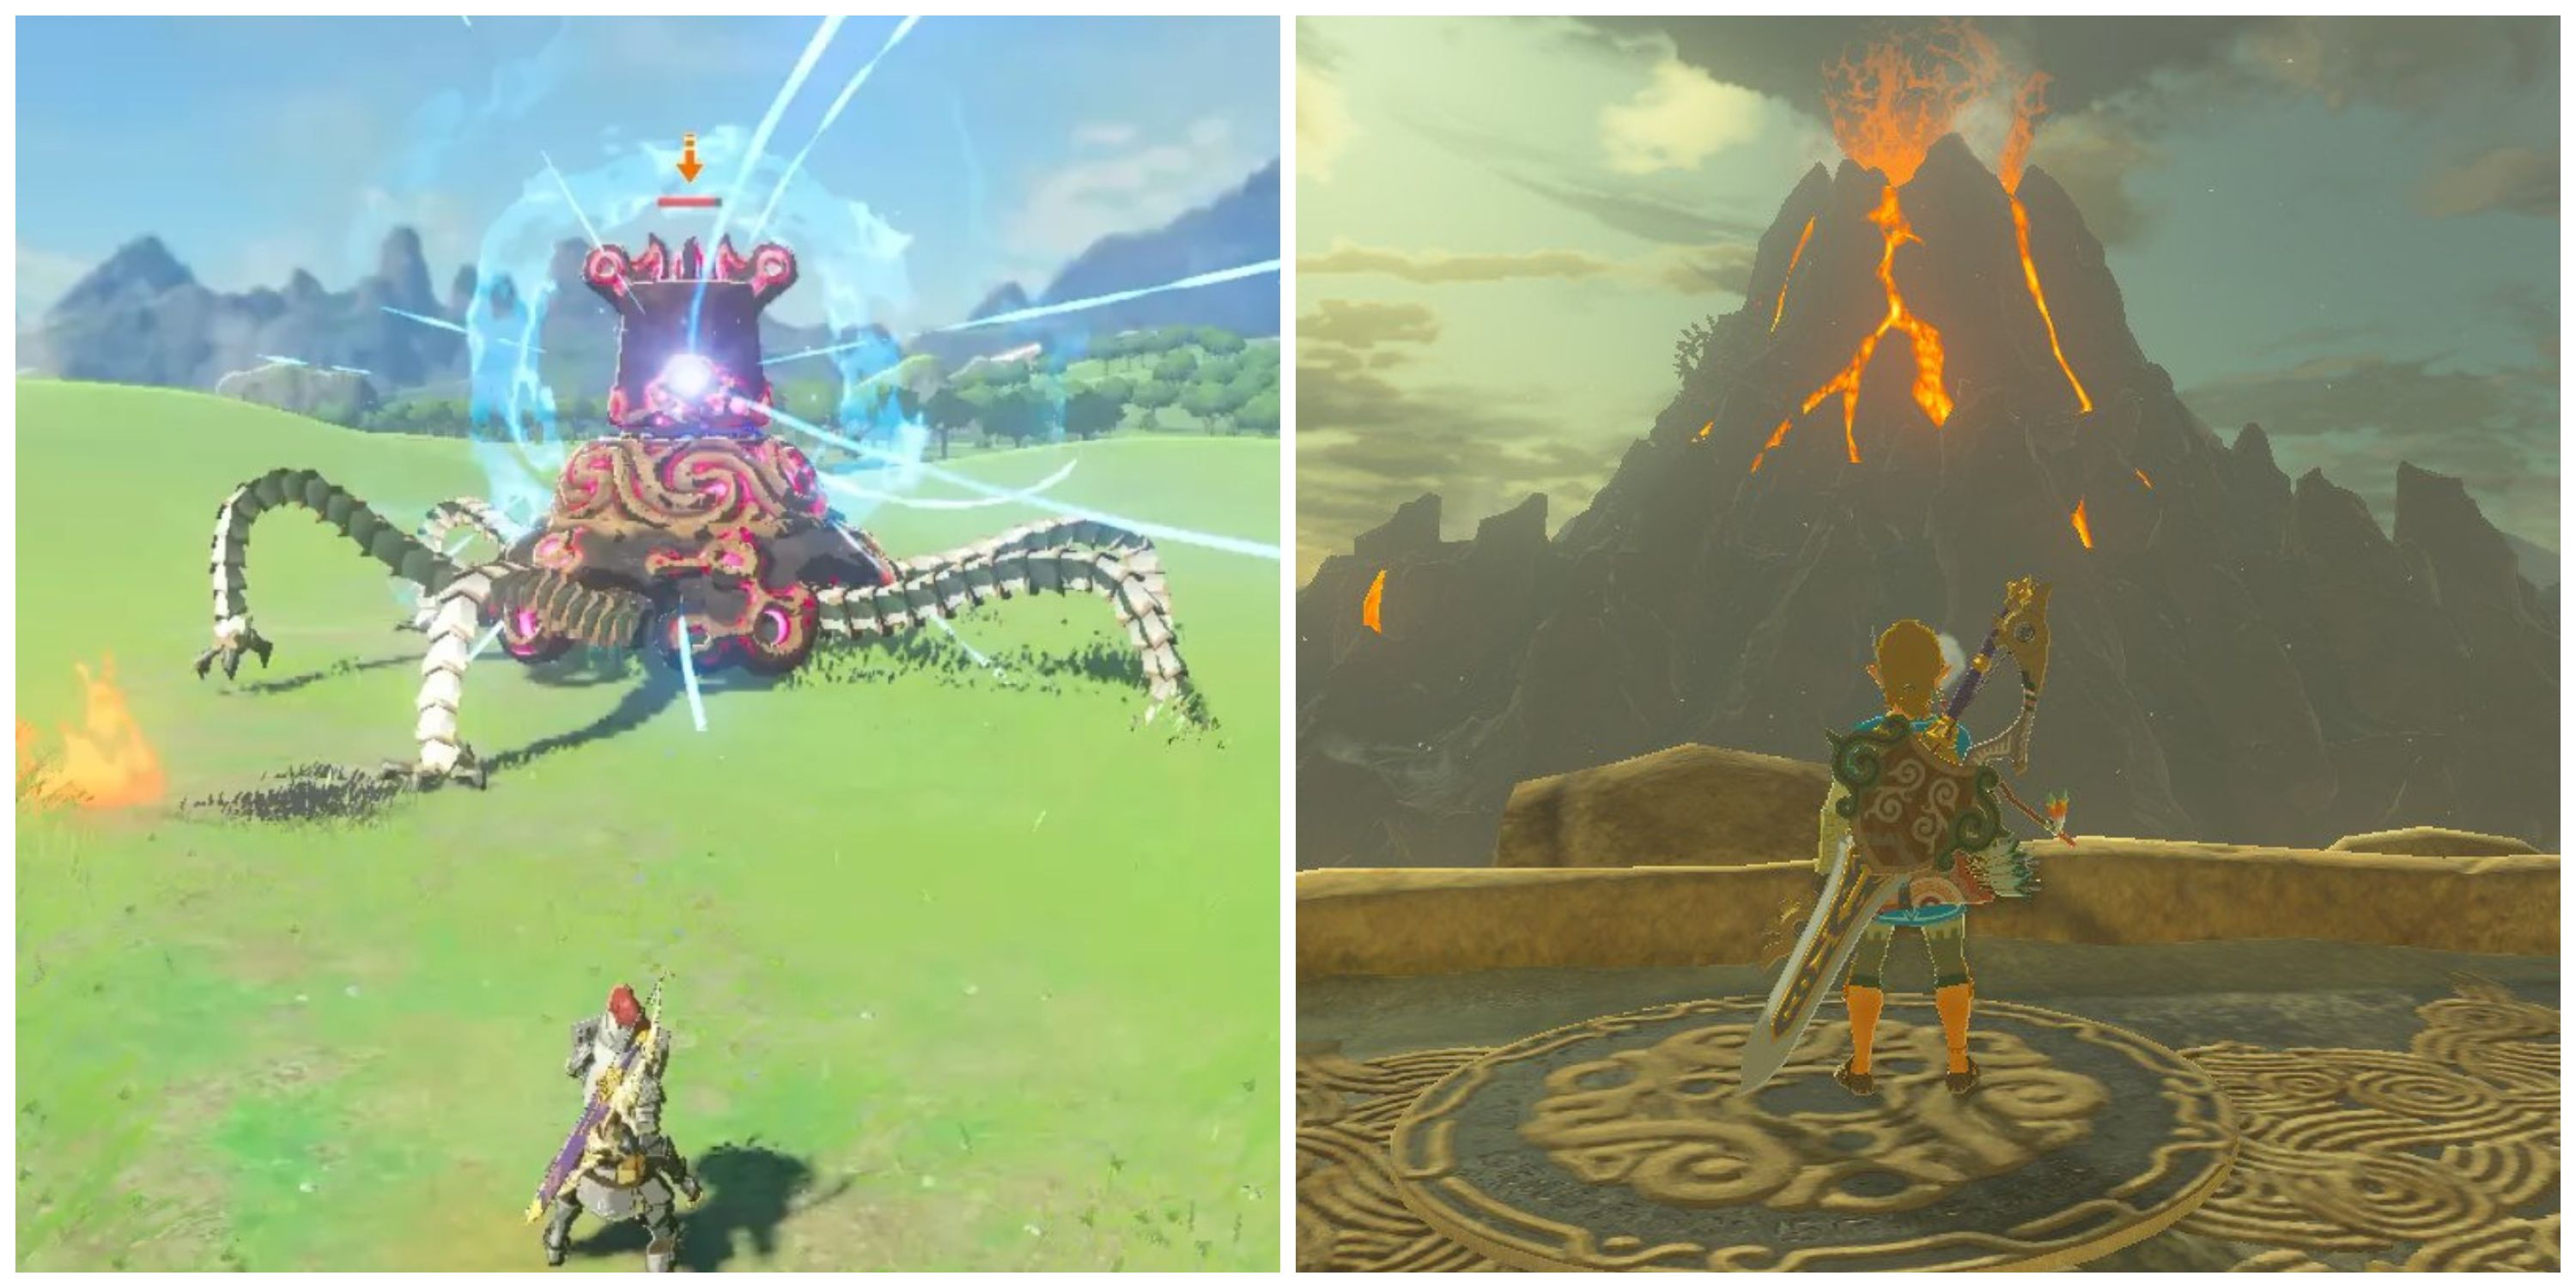 Most Frustrating Areas In The Legend Of Zelda: Breath Of The Wild